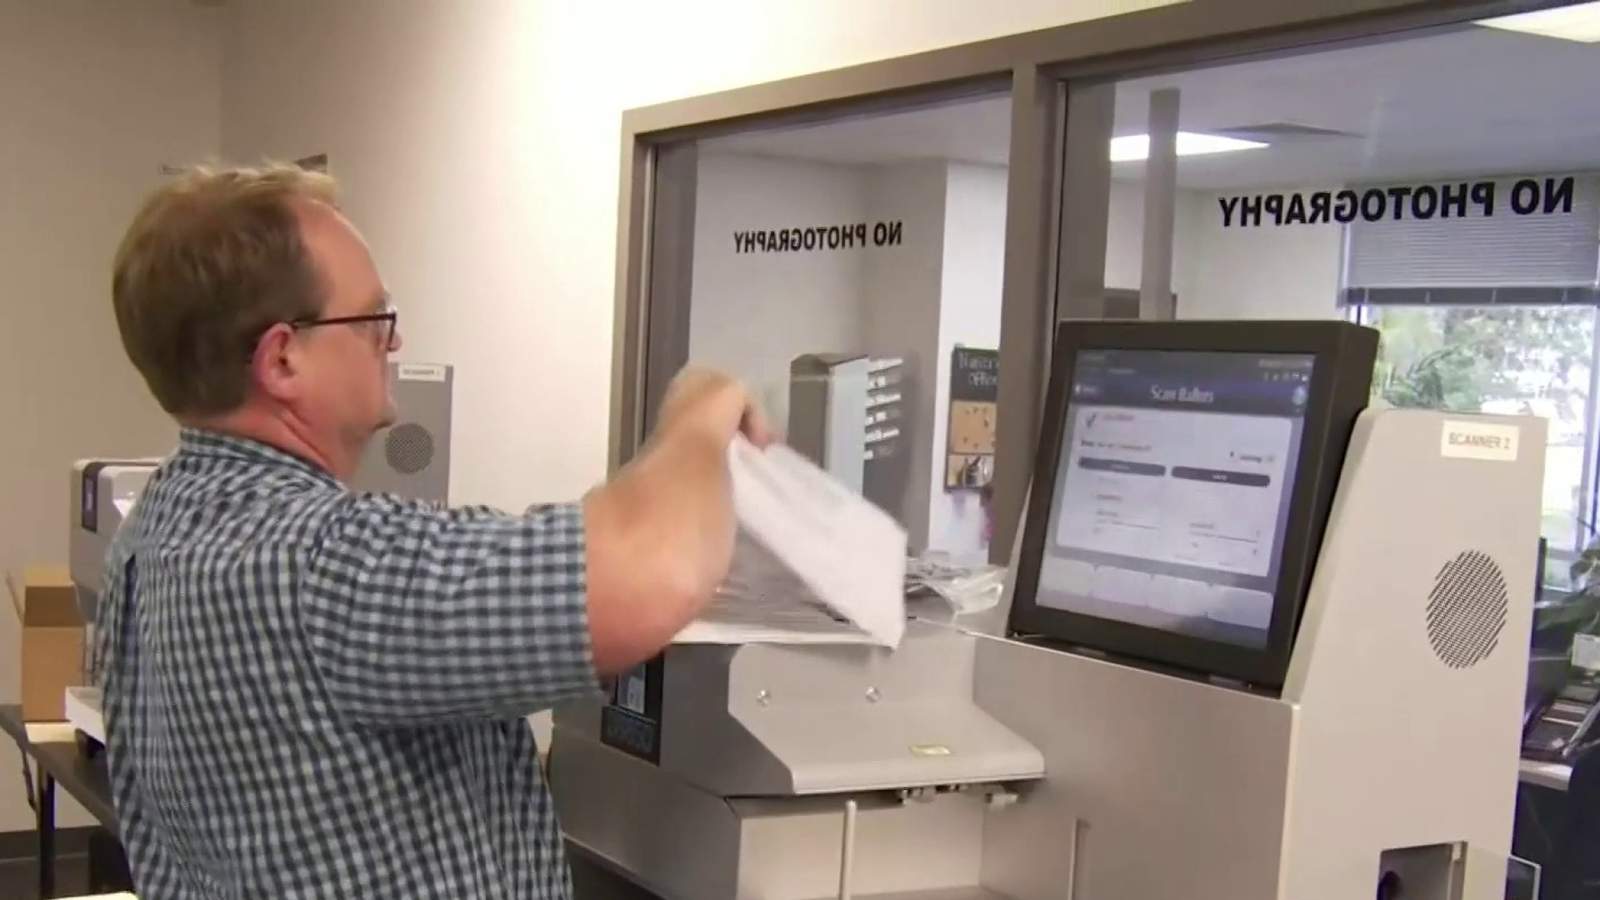 Behind the process of counting vote-by-mail ballots